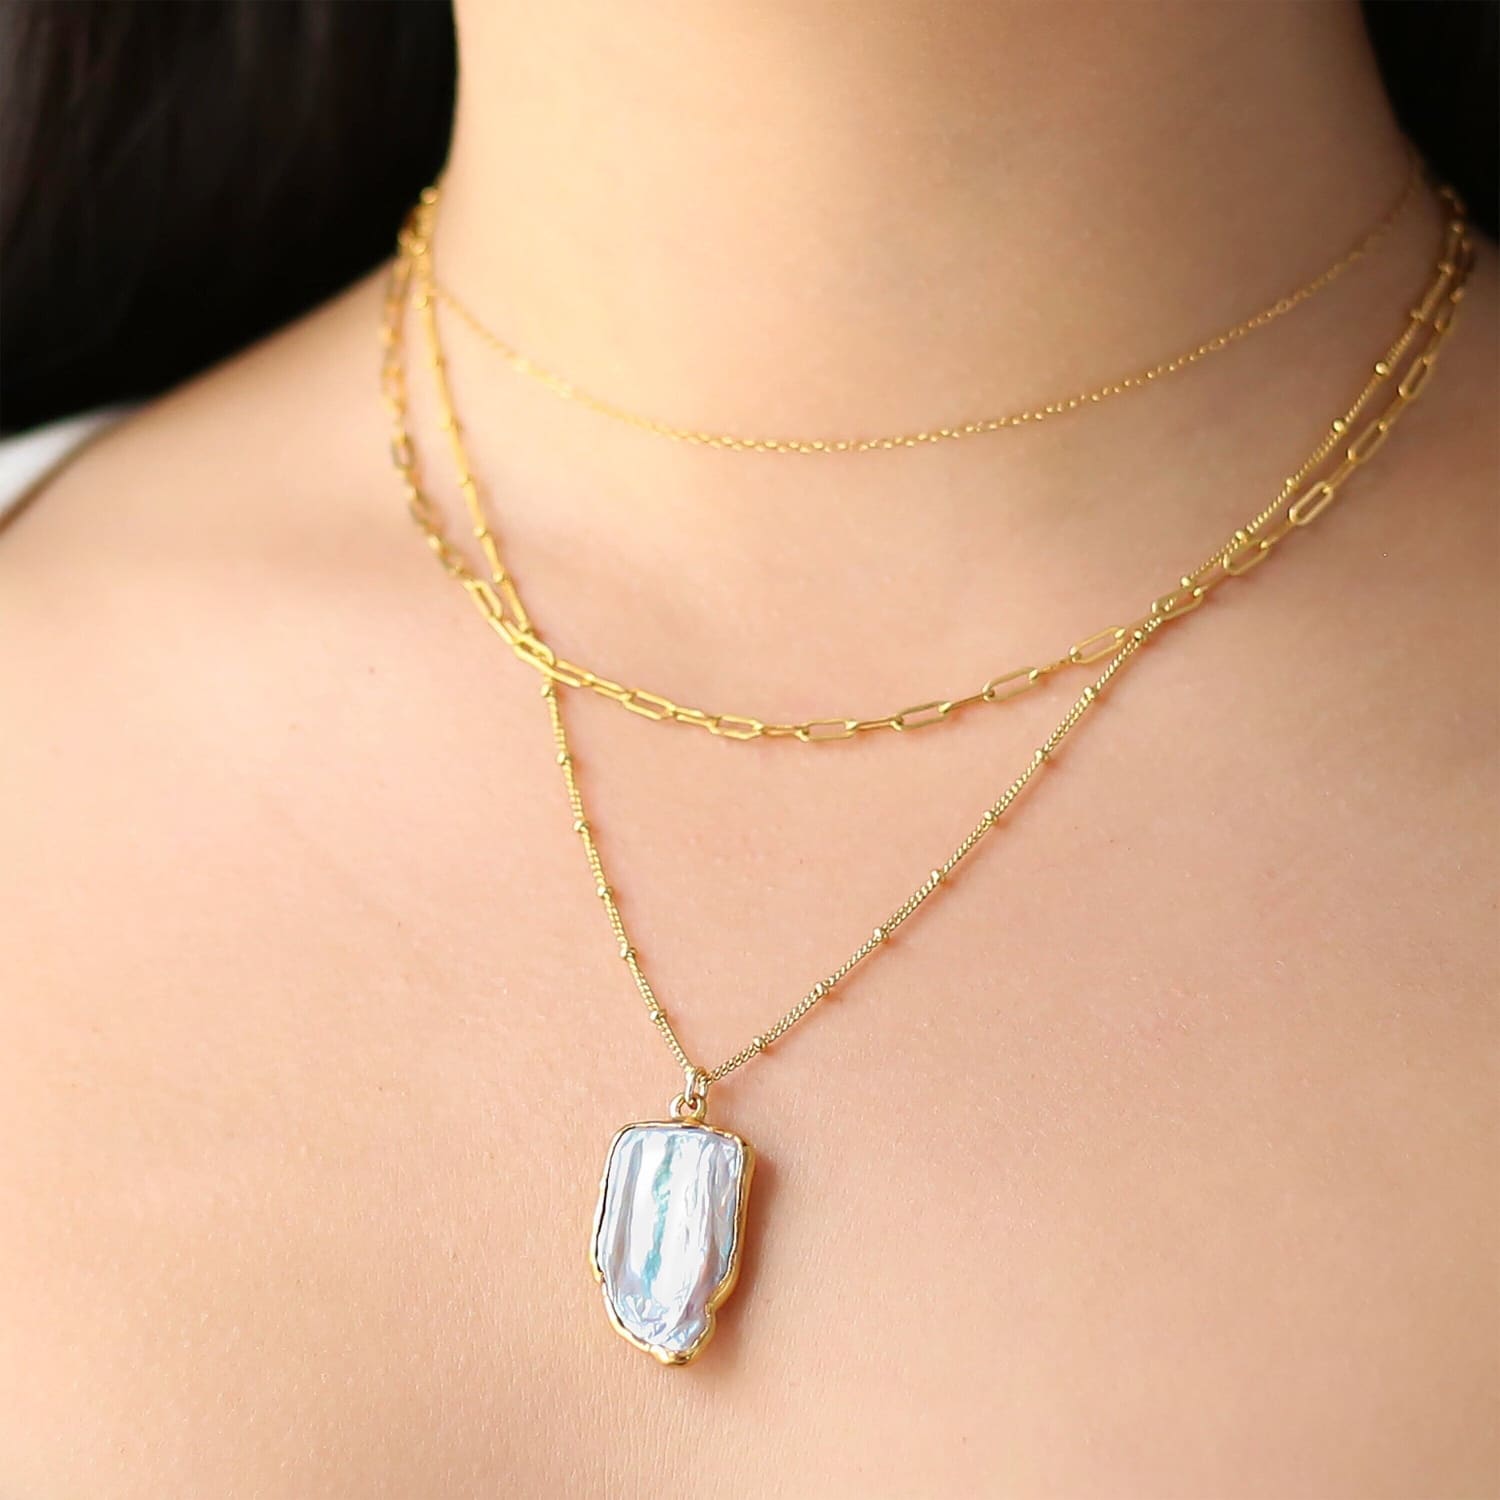 Statement Twin White Baroque Pearl Necklace | Unique Rose Gold Jewelry